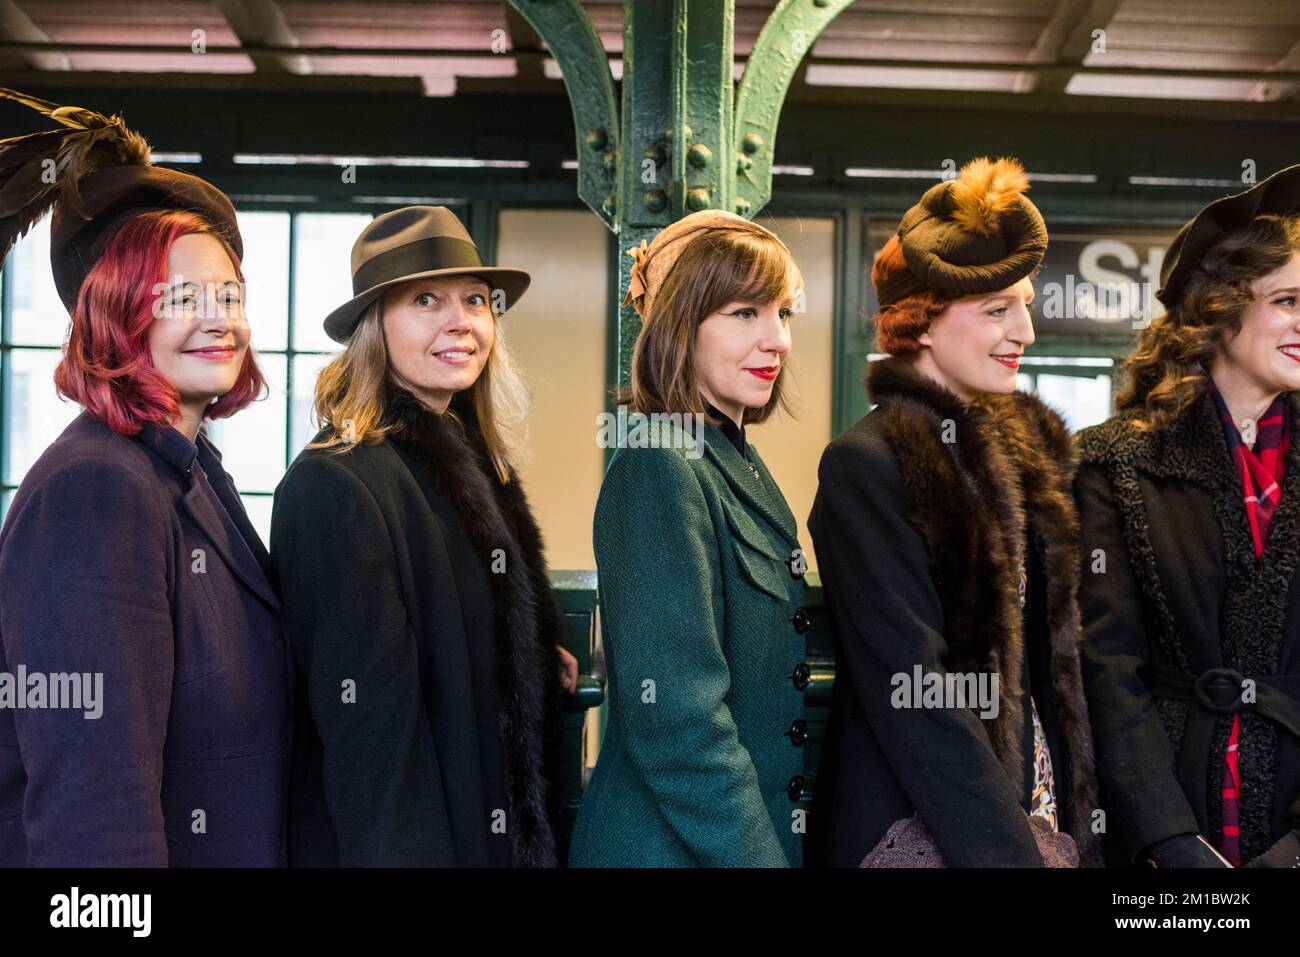 New York City, New York - December 11, 2022: People in period clothing waiting for the Train of Many Colors, Holiday Nostalgia Rides, NYC Subway Stock Photo